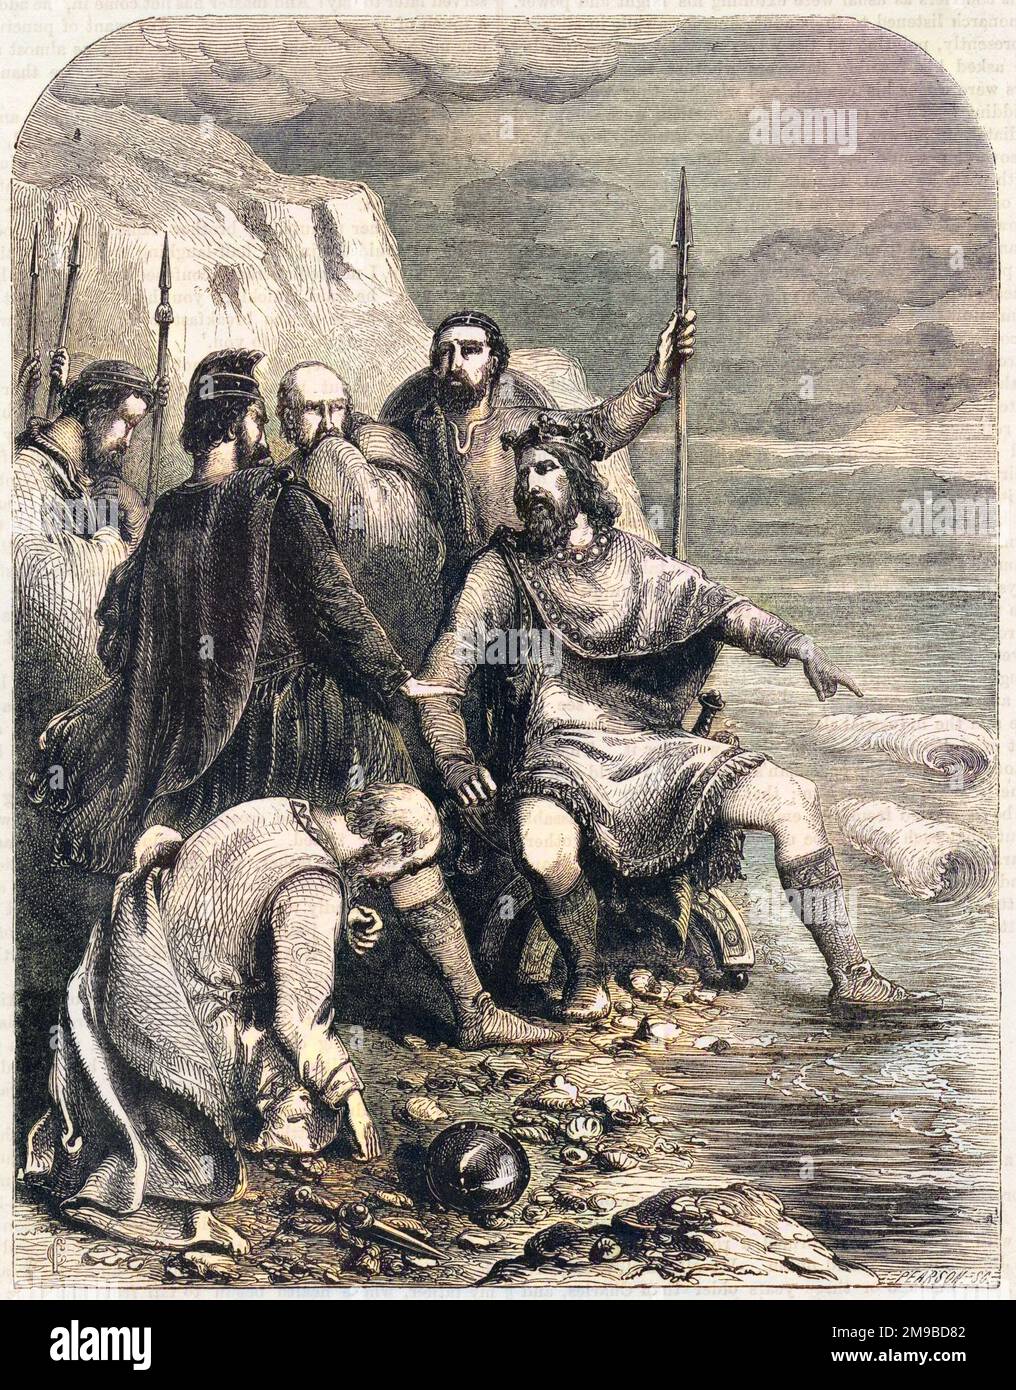 King Canute and the tide - Wikipedia